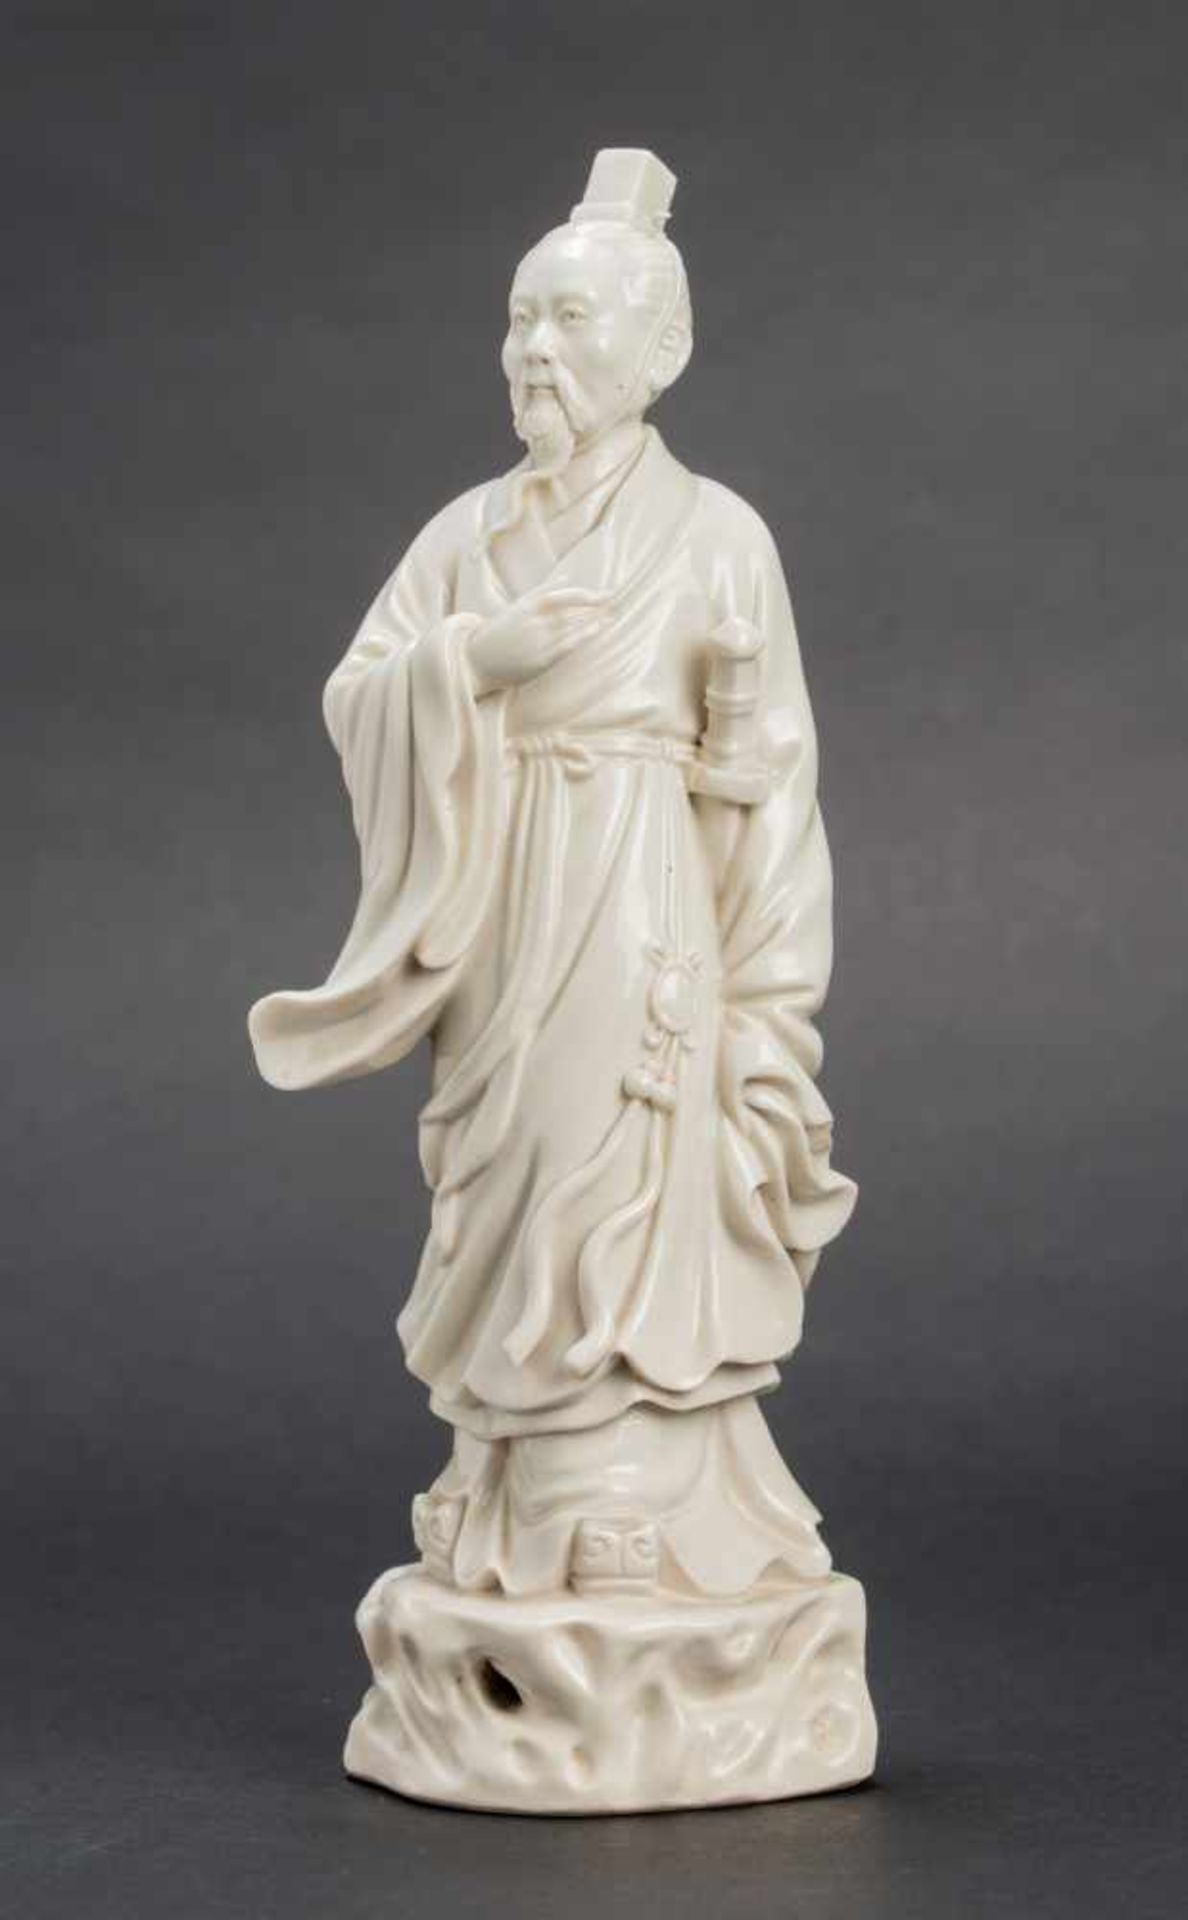 A DEHUA BLANC DE CHINE FIGURE OF A WARRIORPorcelainChina, late 19th to early 20th centuryFinely